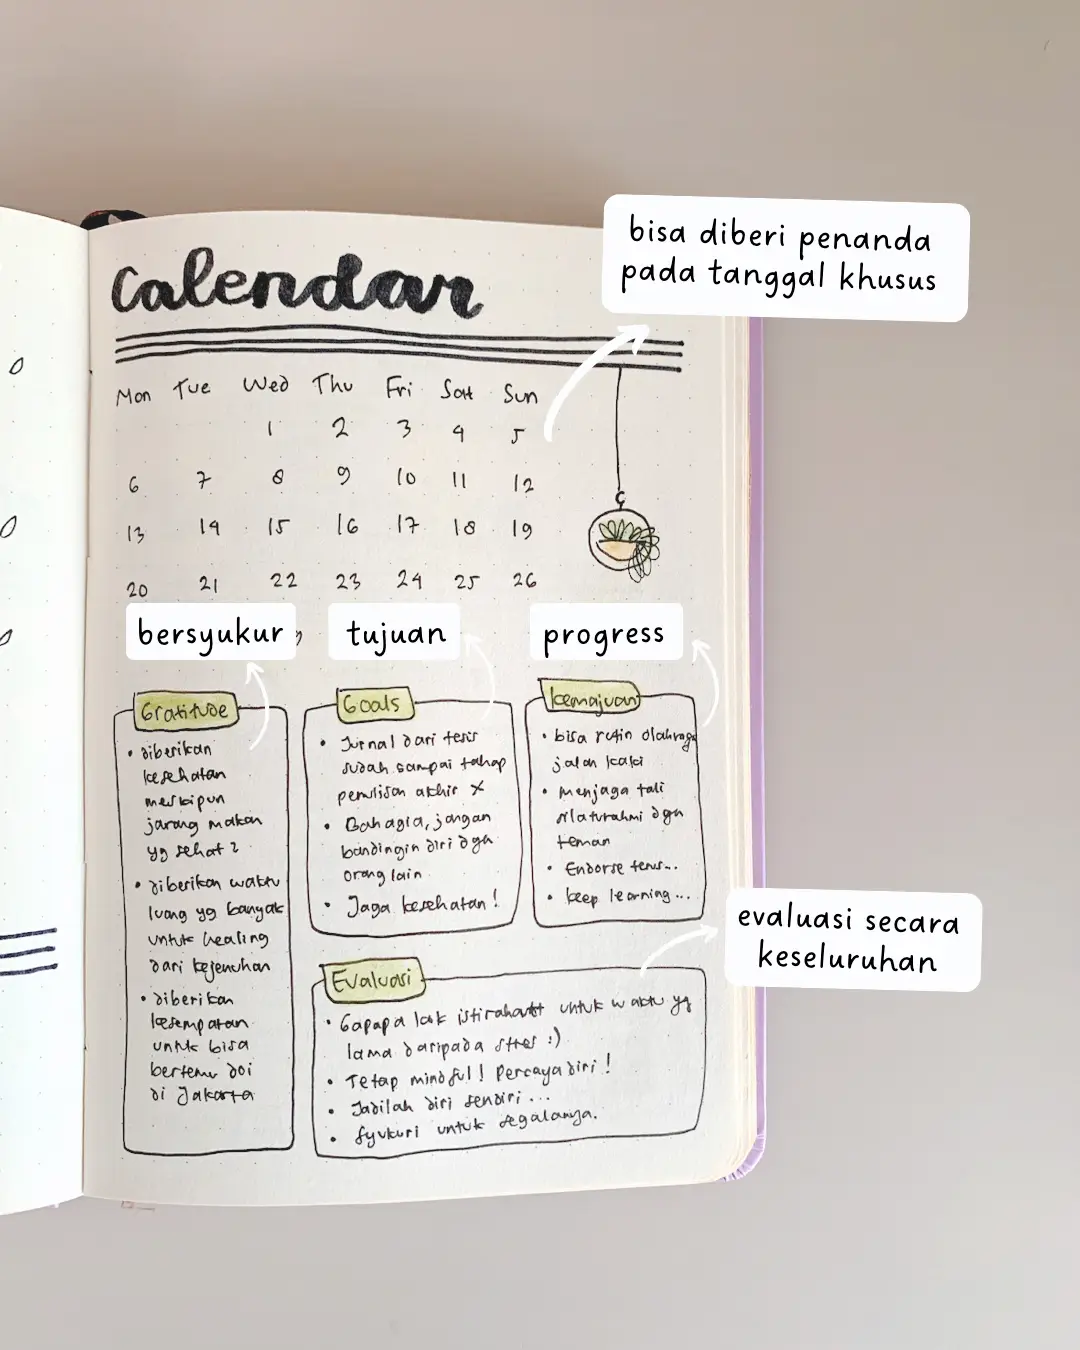 11 Amazing Bullet Journal Ideas That Cultivate Self-care -Our Mindful Life